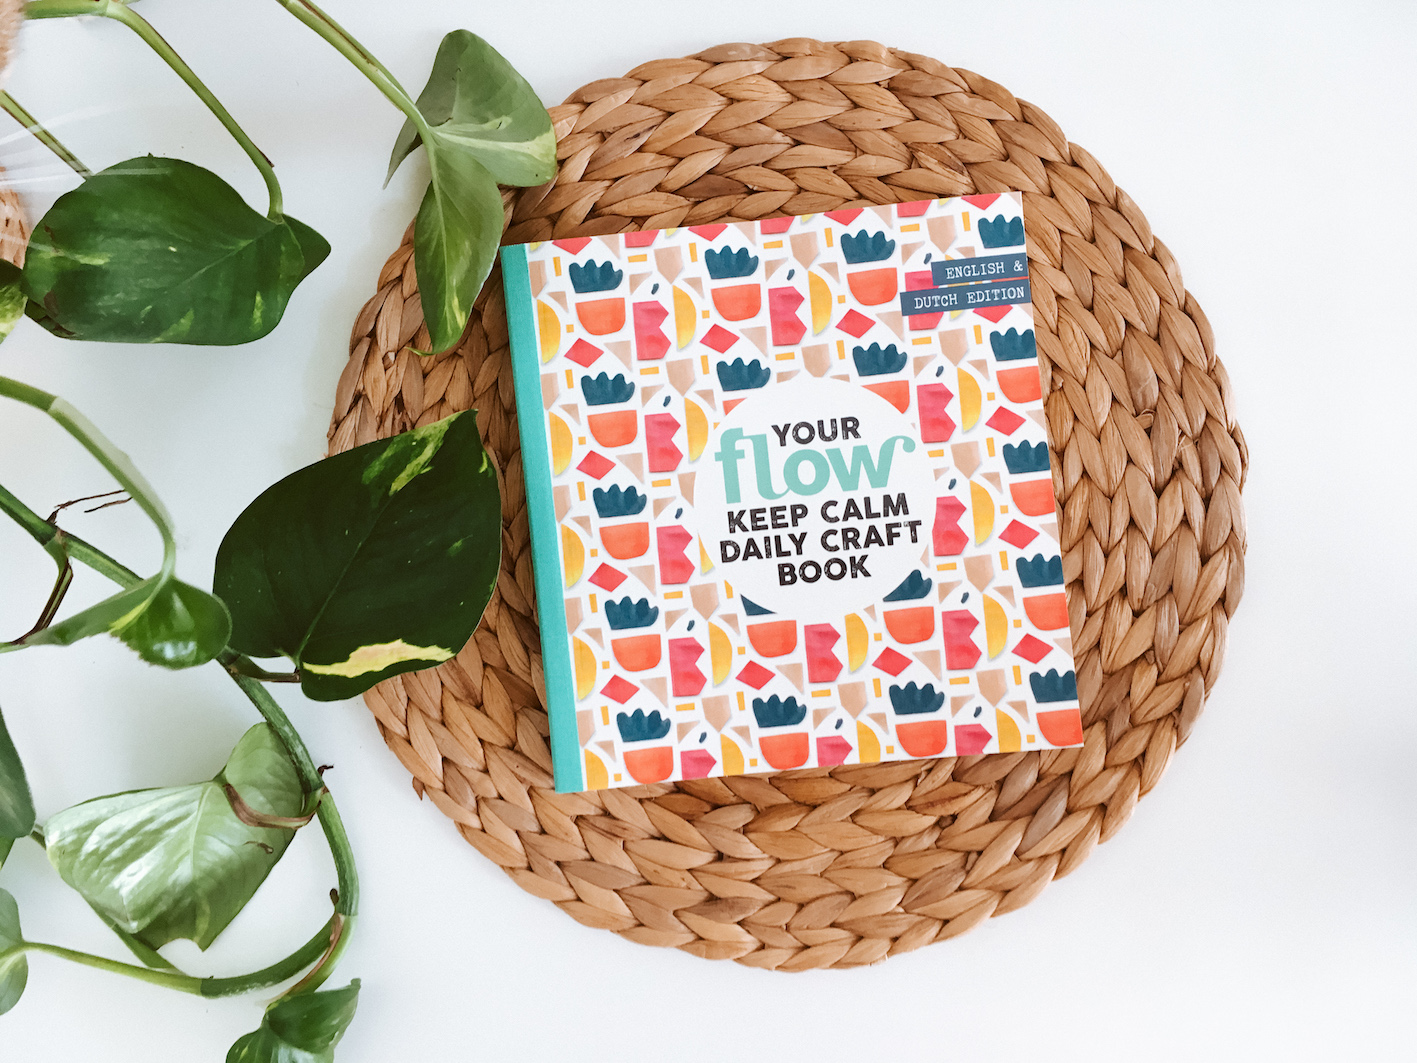 Your Keep Calm Daily Craft Book